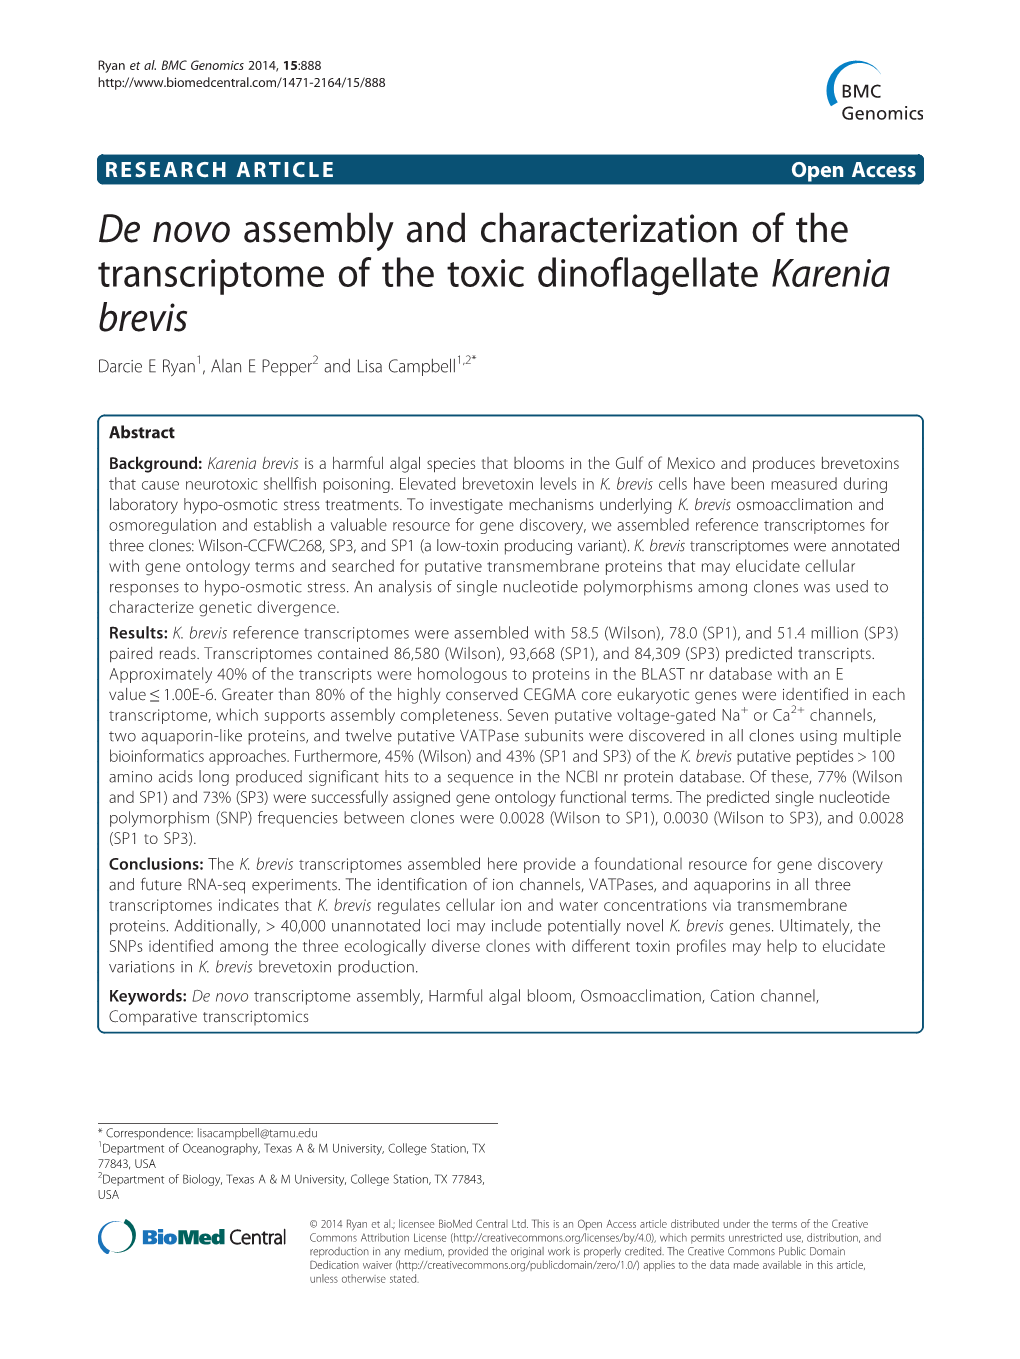 De Novo Assembly and Characterization of the Transcriptome of the Toxic Dinoflagellate Karenia Brevis